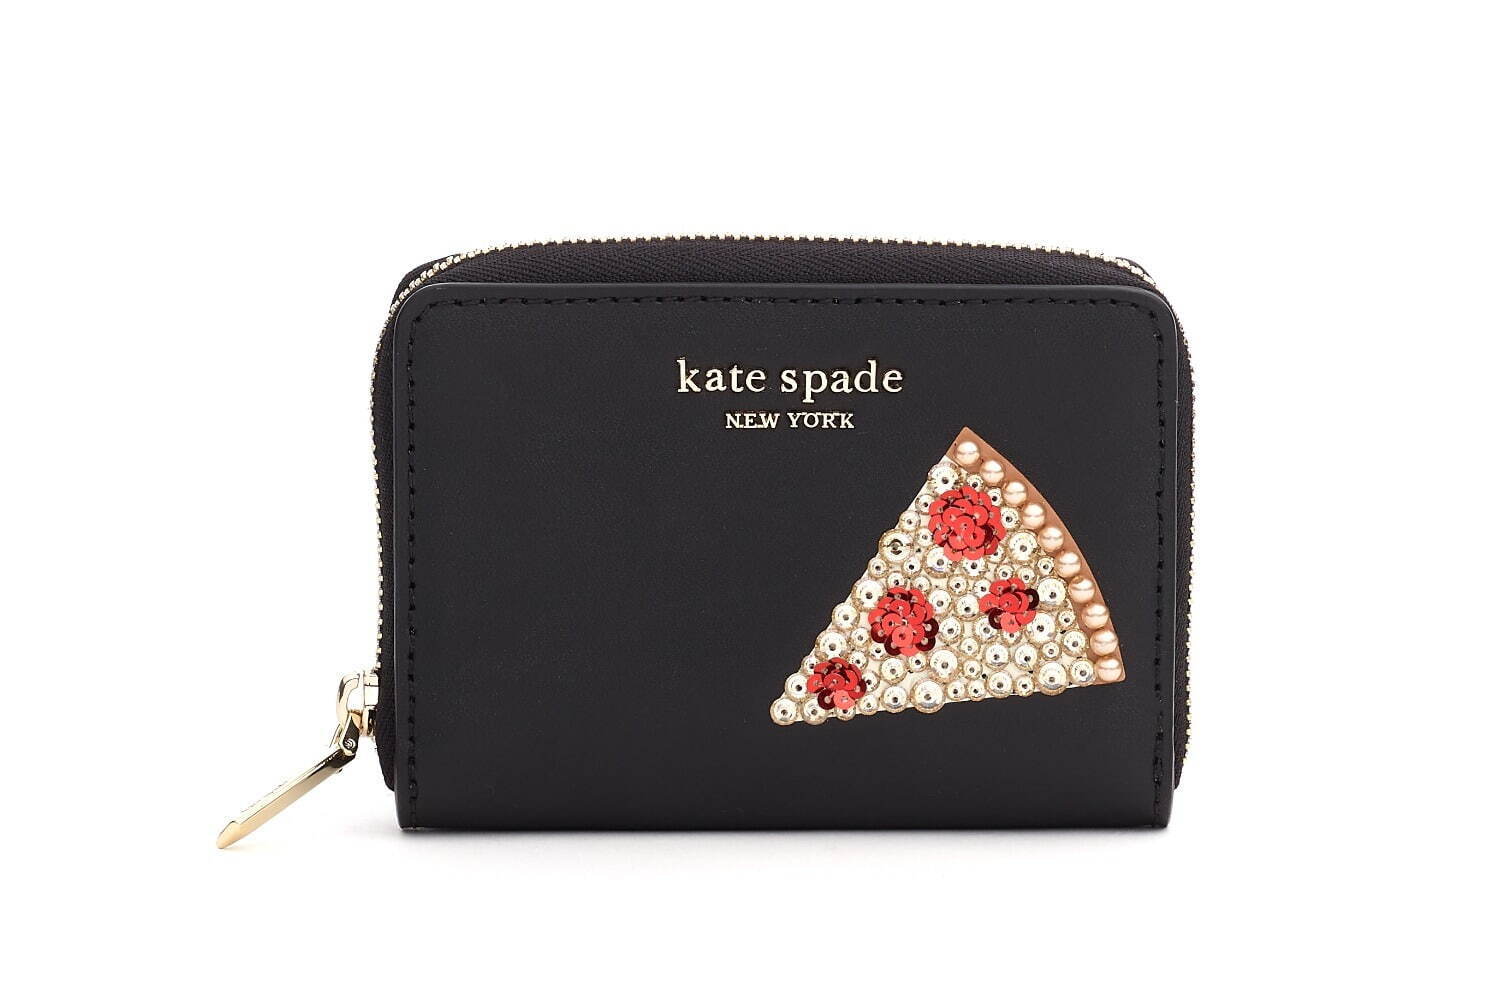 Kate Spade Christmas Collection Has Pizza-Inspired Items Like Card 